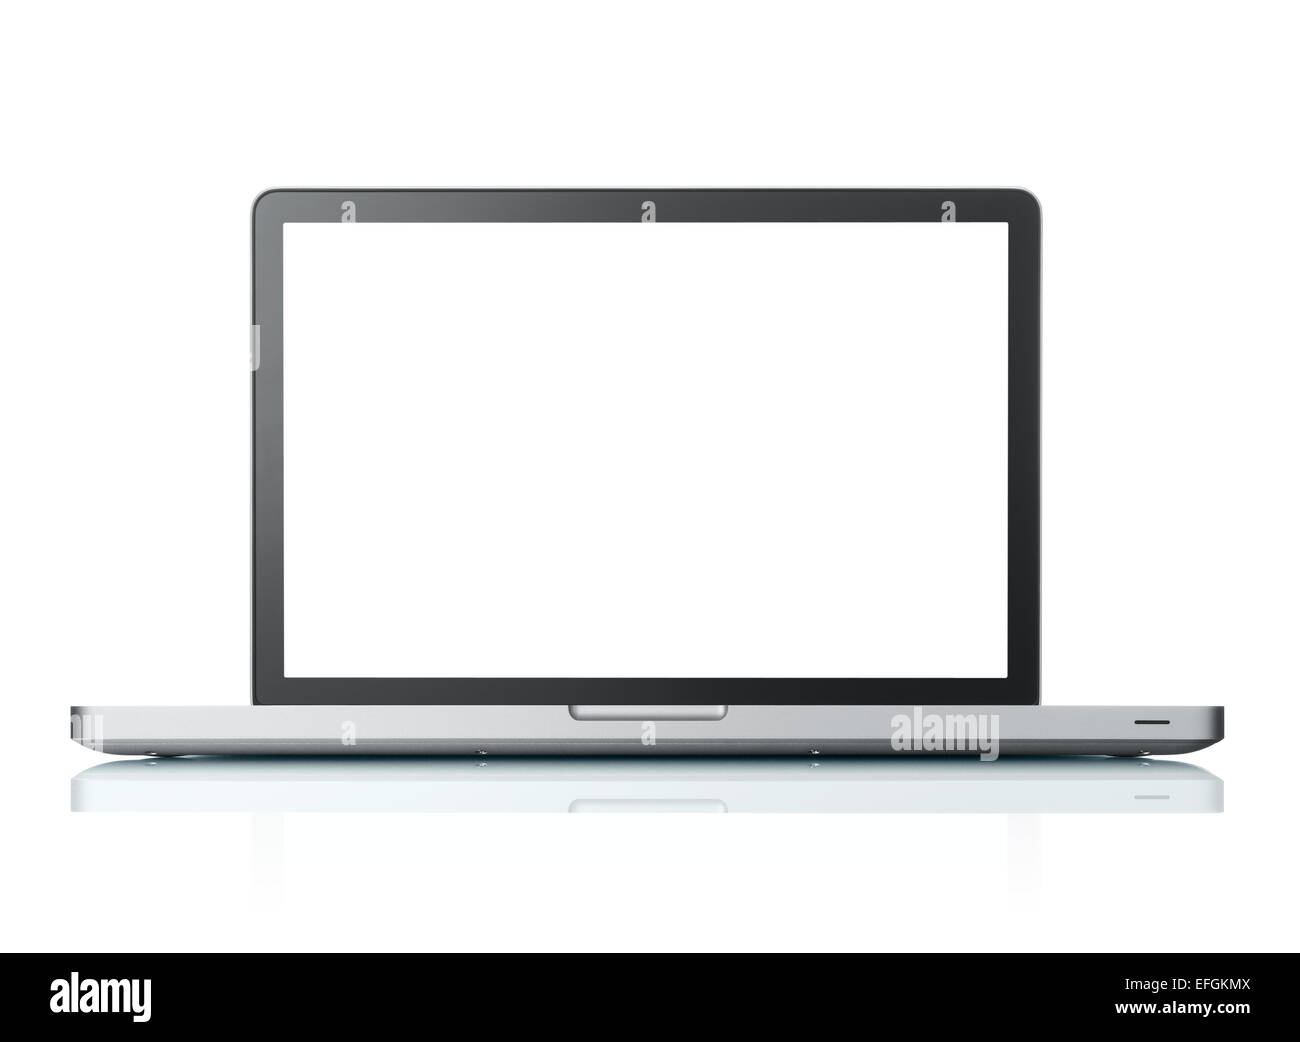 front view of laptop on low angle with blank monitor Stock Photo